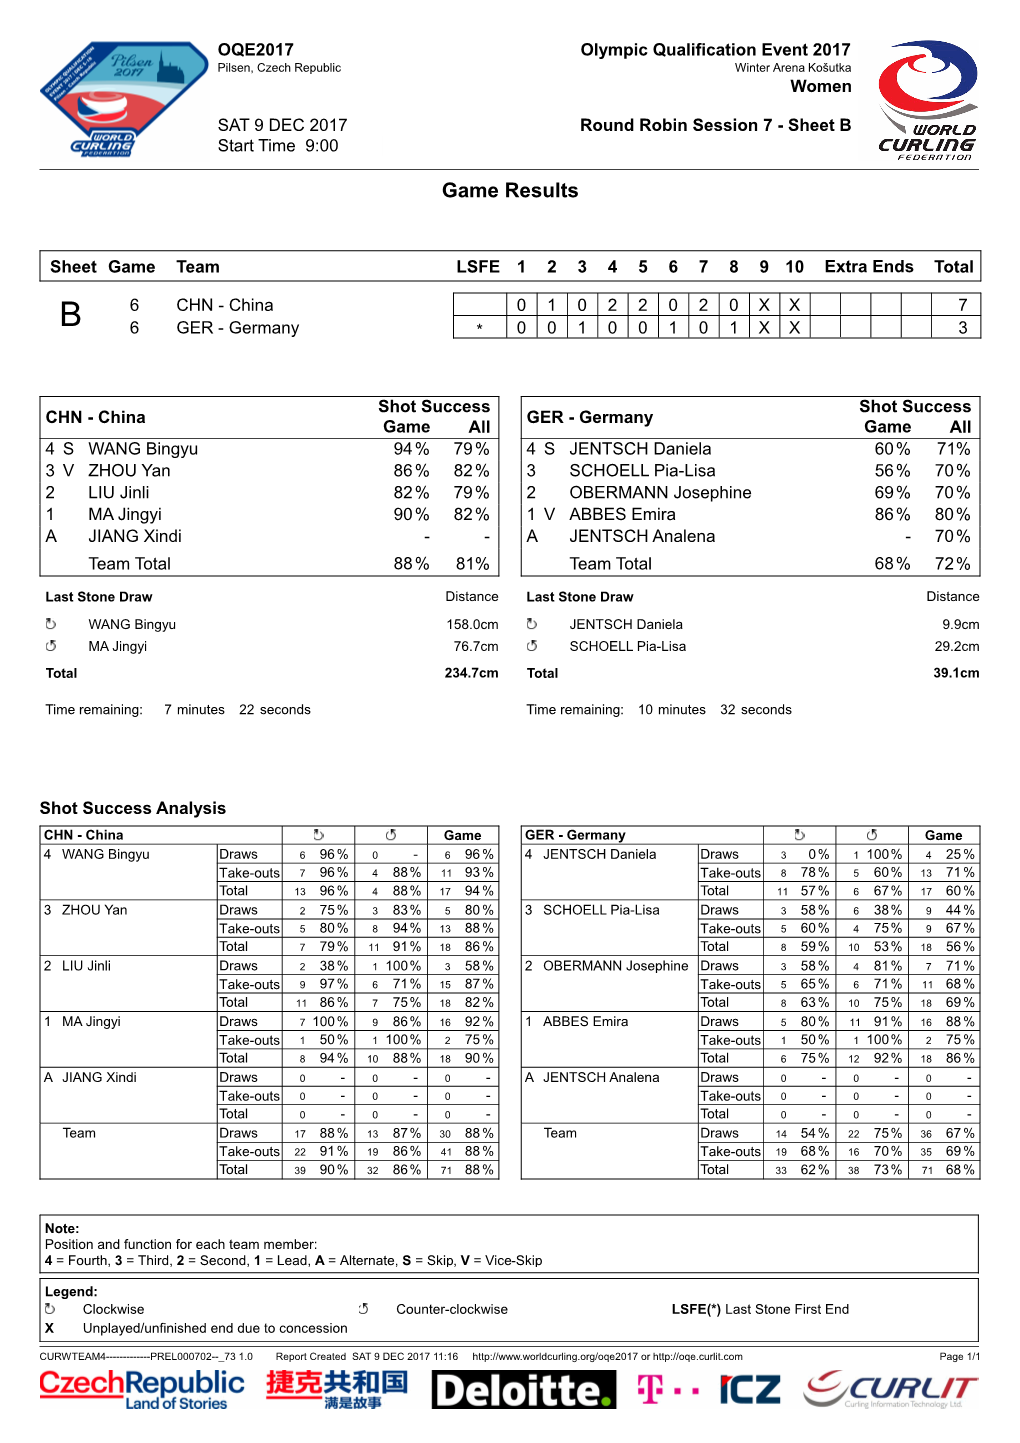 Game Results CHN-GER